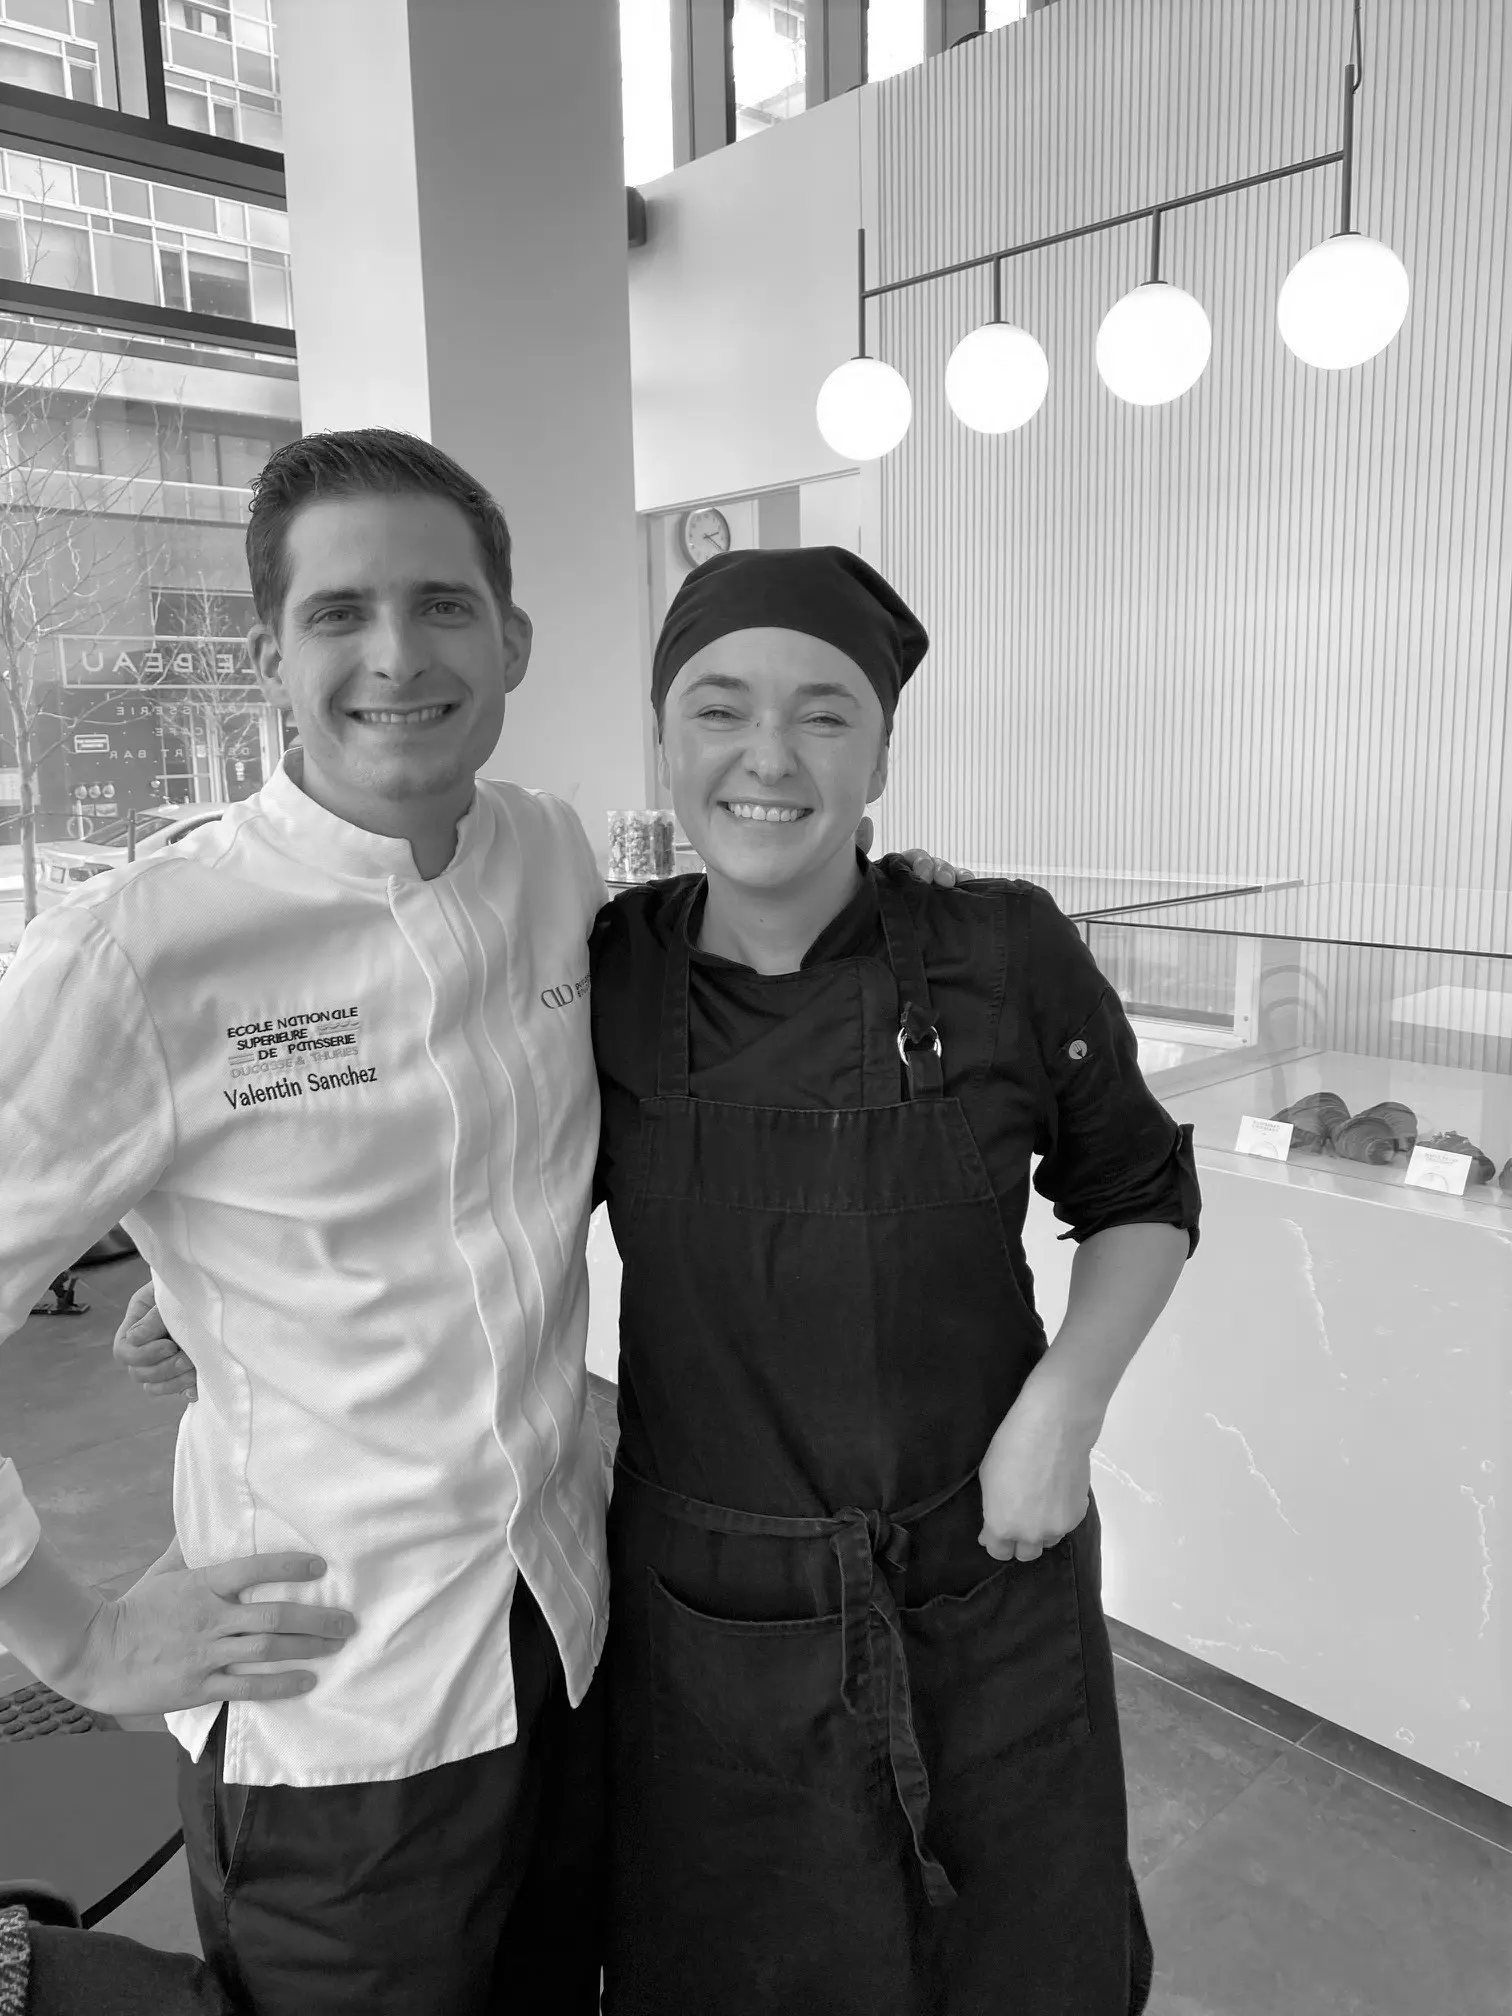 Chef Valentin Sanchez with a former student